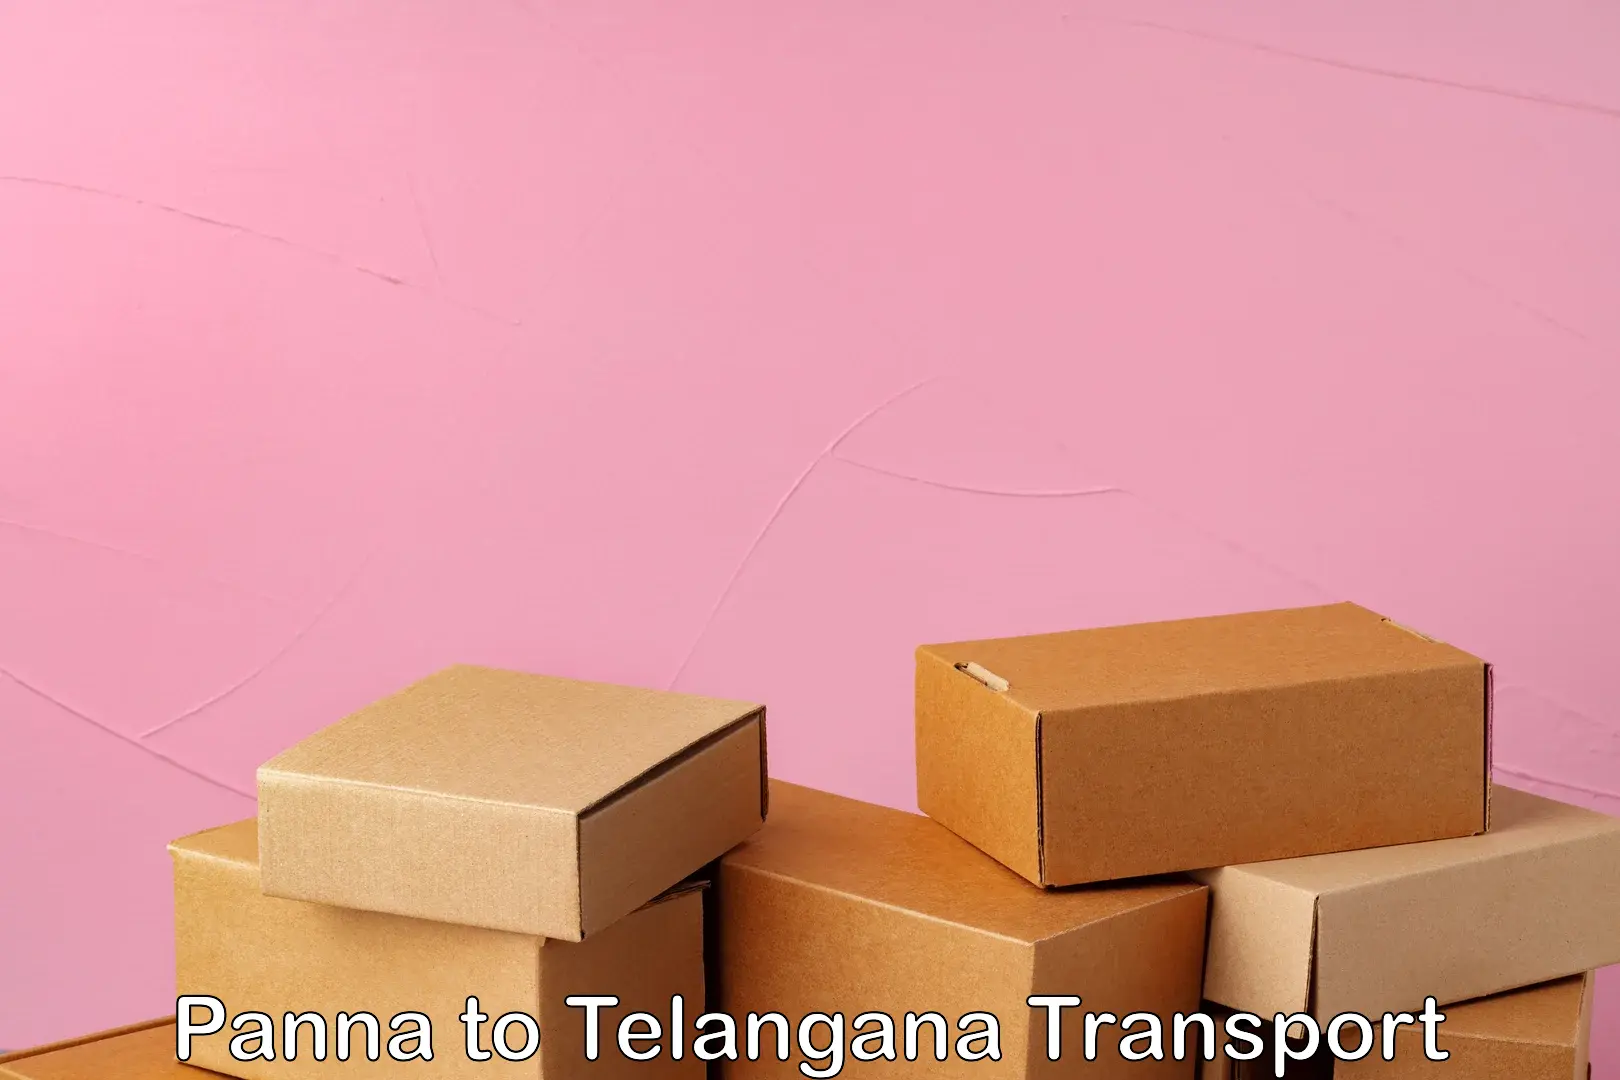 Air freight transport services Panna to Hyderabad